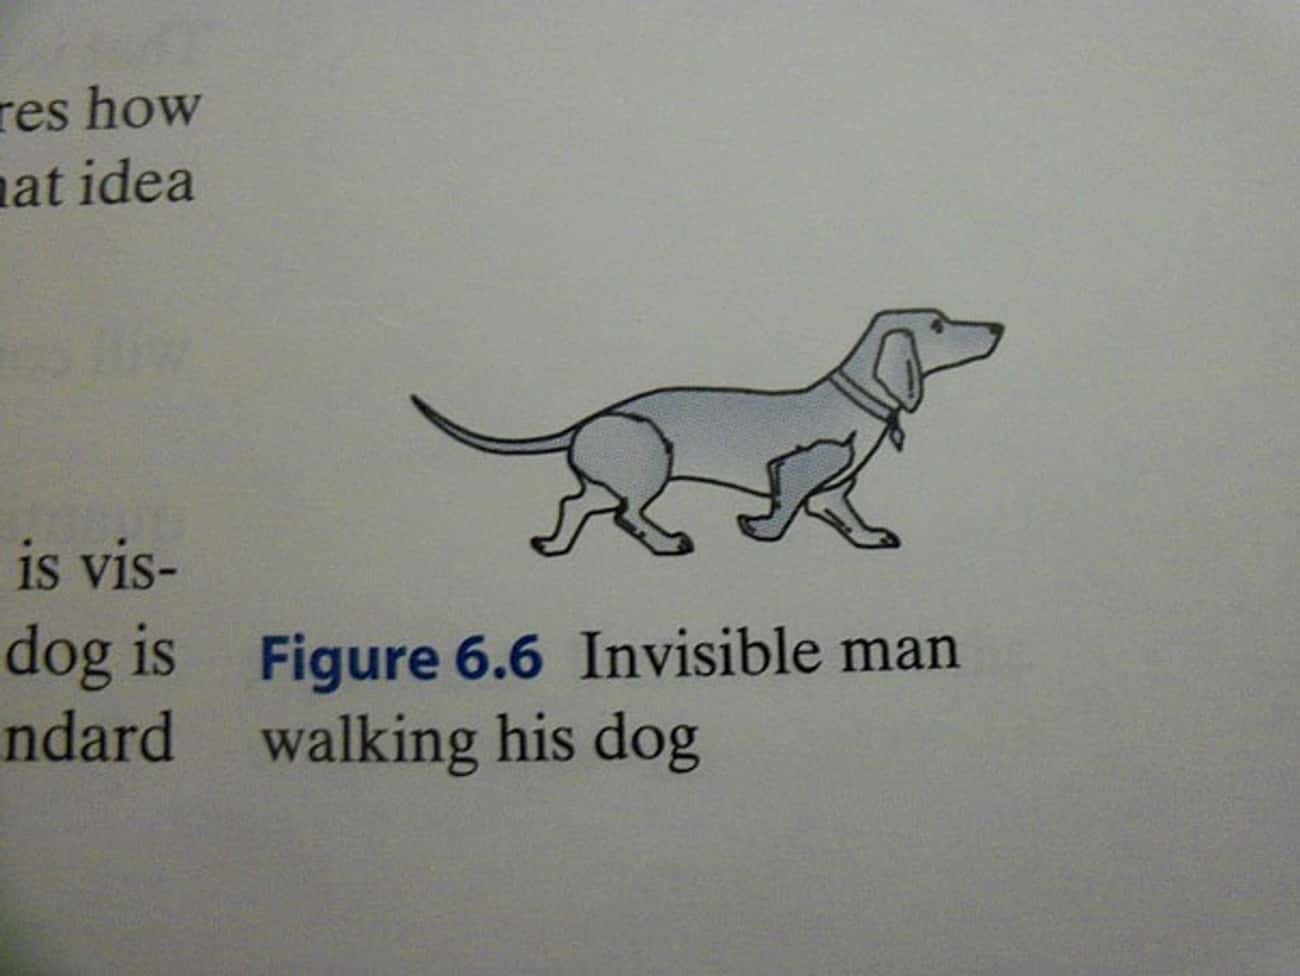 Invincible Figure. This is his dog